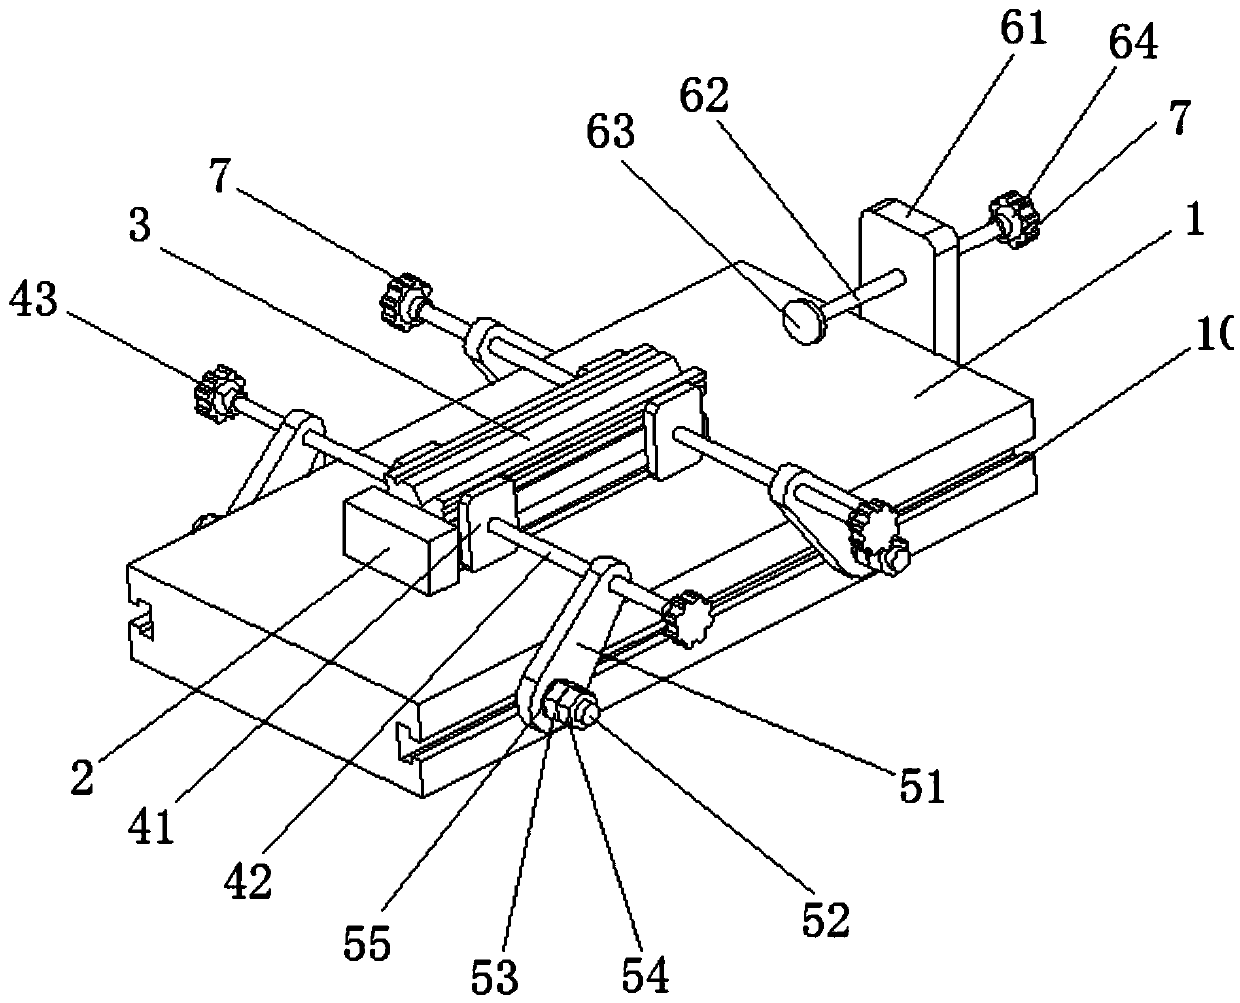 Improved adjusting and locking mechanism for pressing corners of part of paving machine